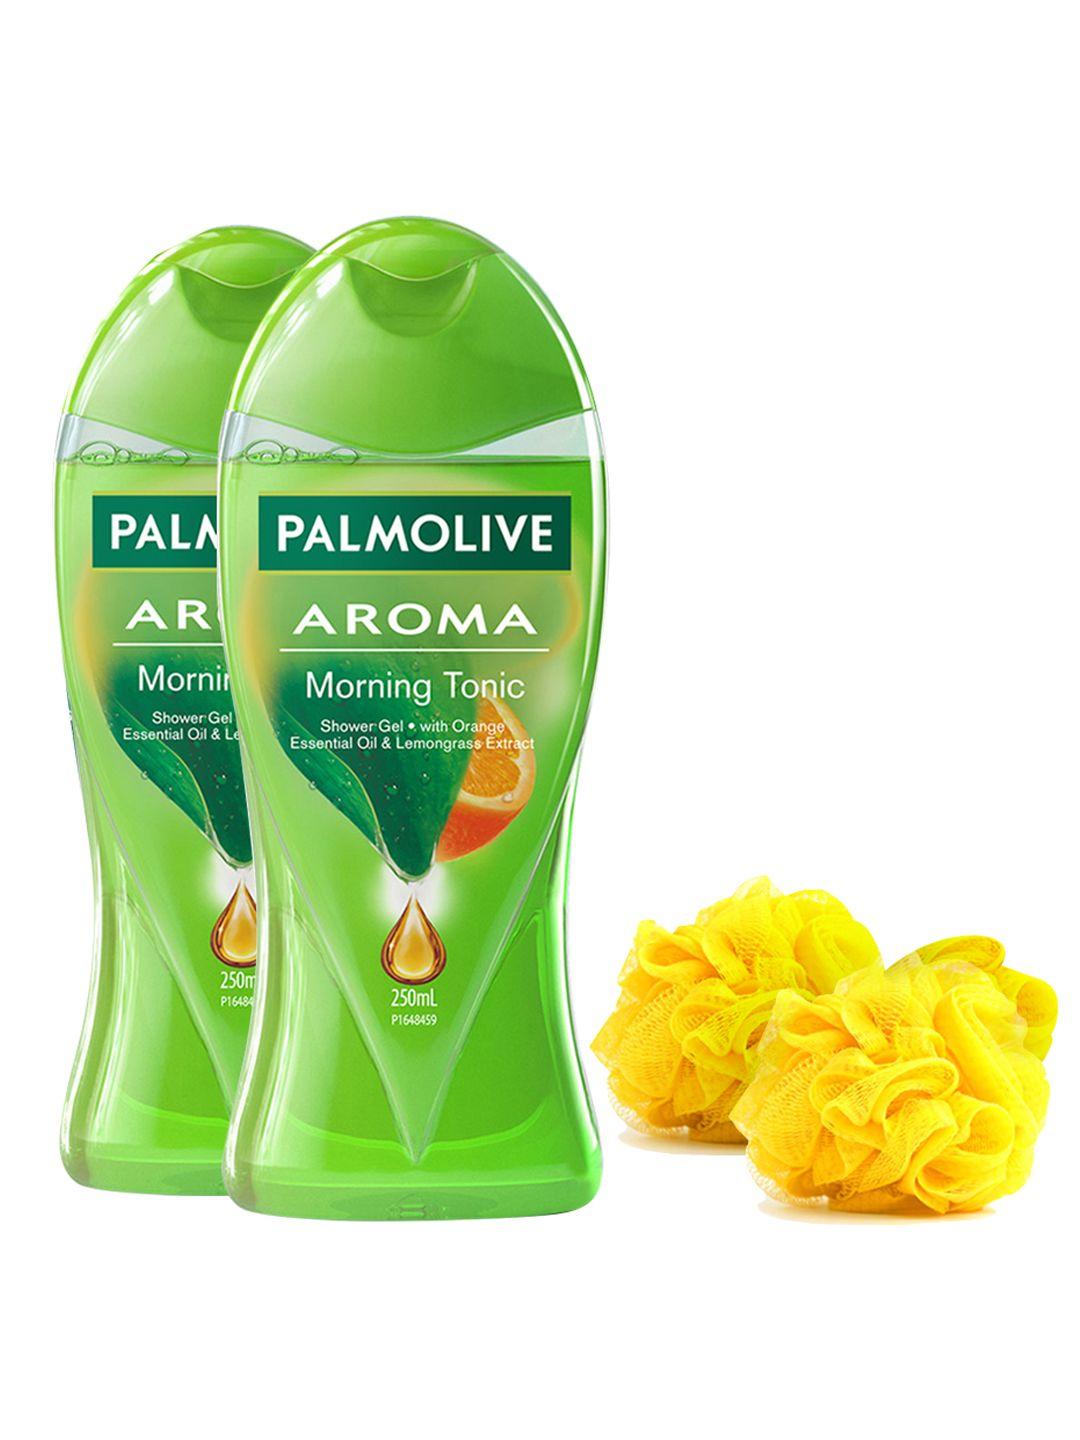 palmolive set of 2 aroma morning tonic shower gel with loofah - 250 ml each